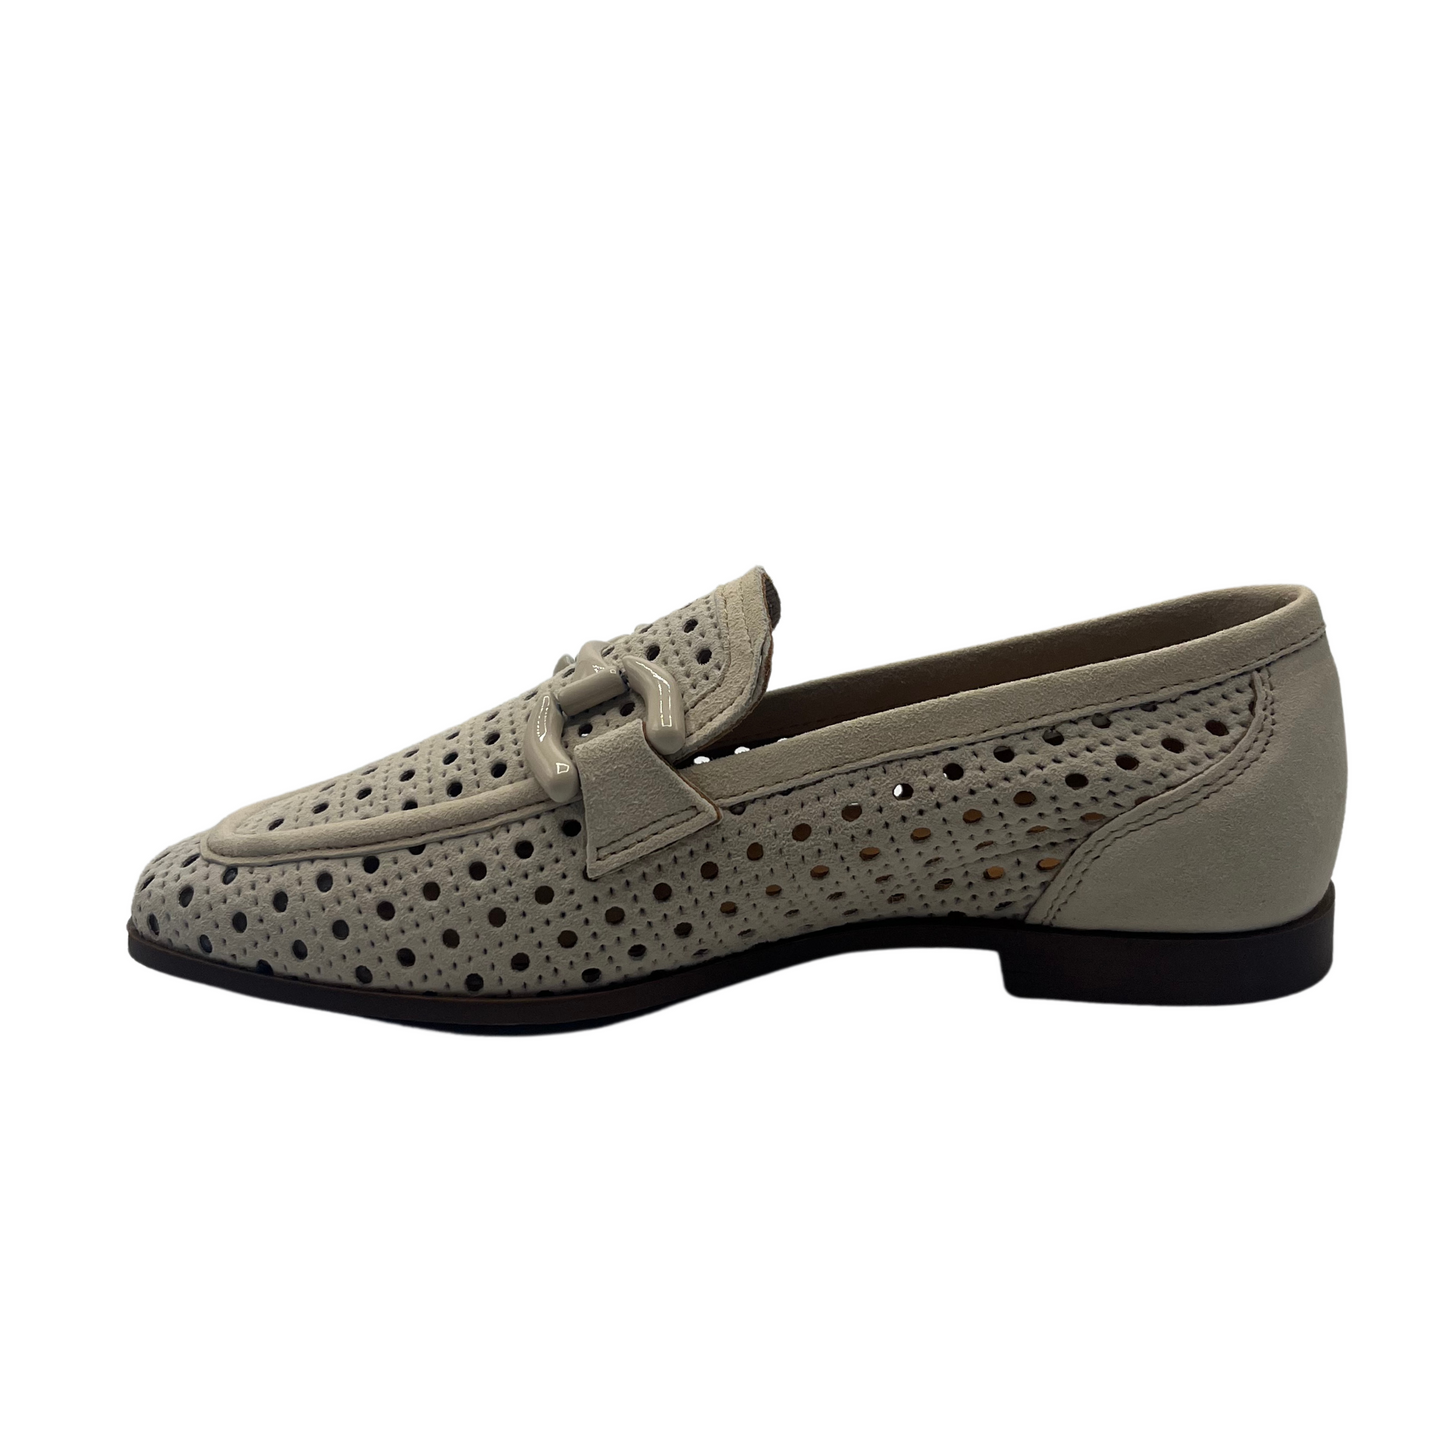 Left facing view of cream perforated suede loafer with matching bit detail and low heel